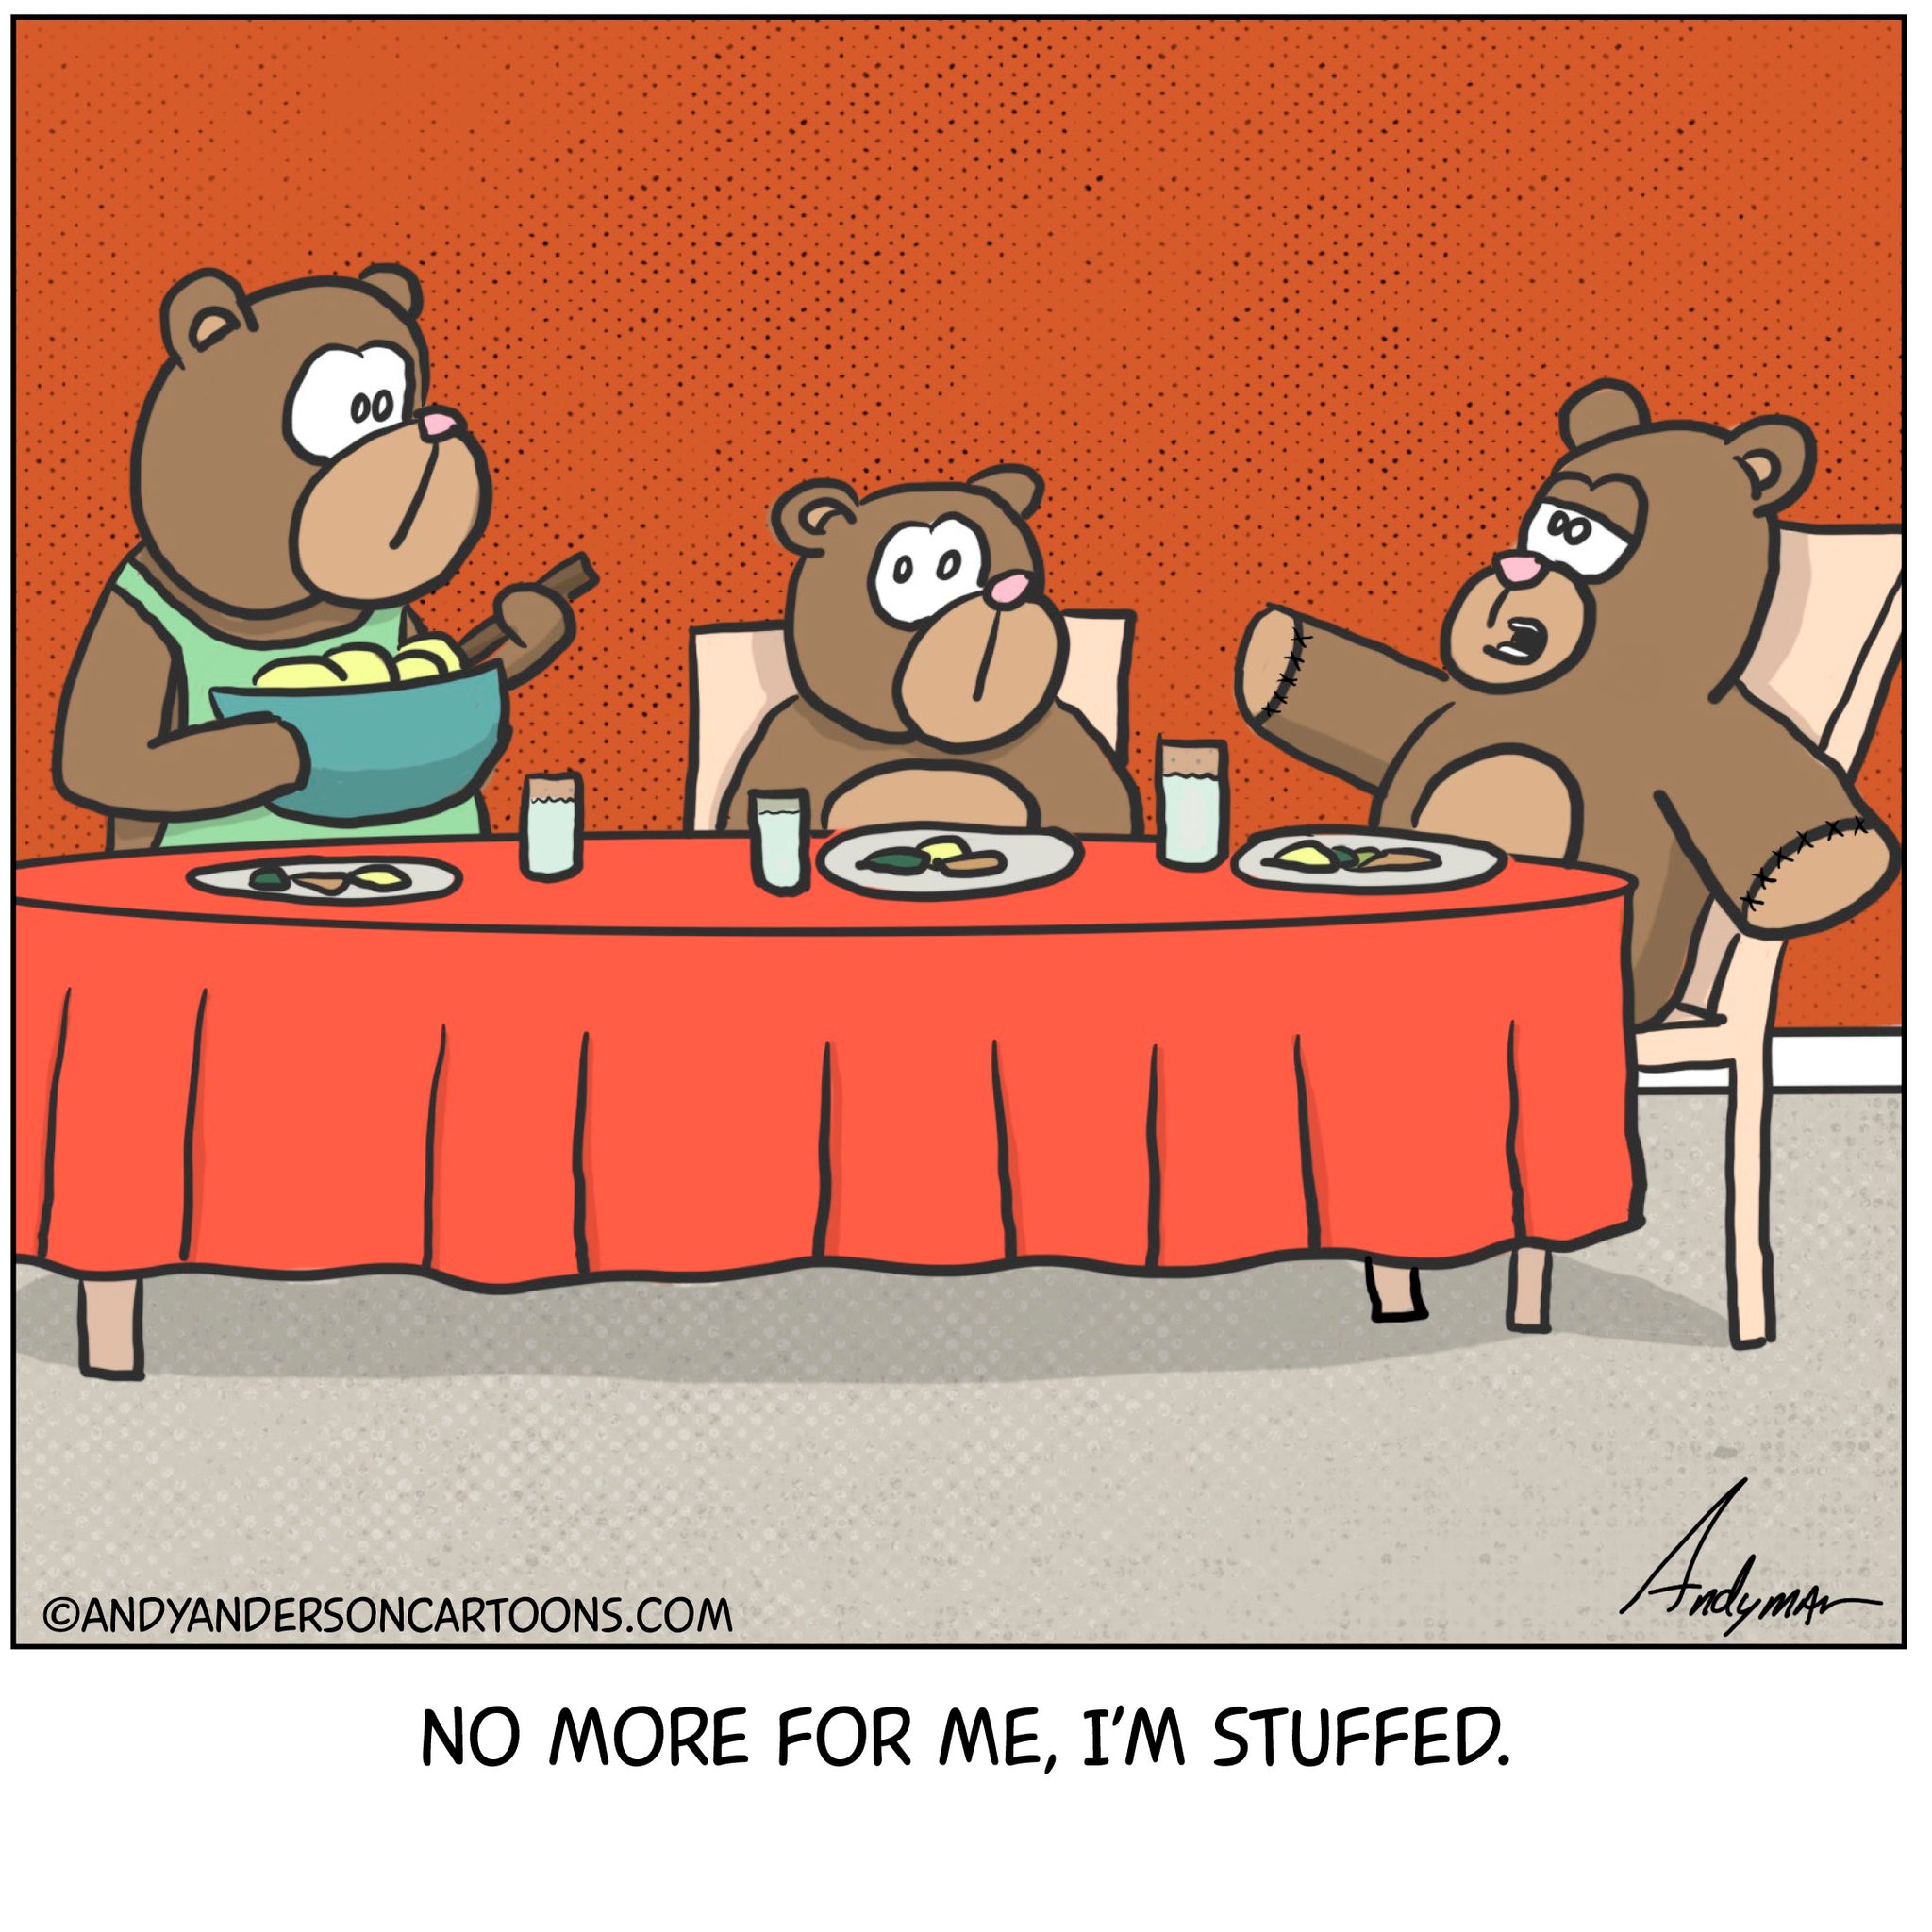 Funny cartoon about a stuffed Teddy bear sitting at the dinner table saying "no more for me I'm stuffed"